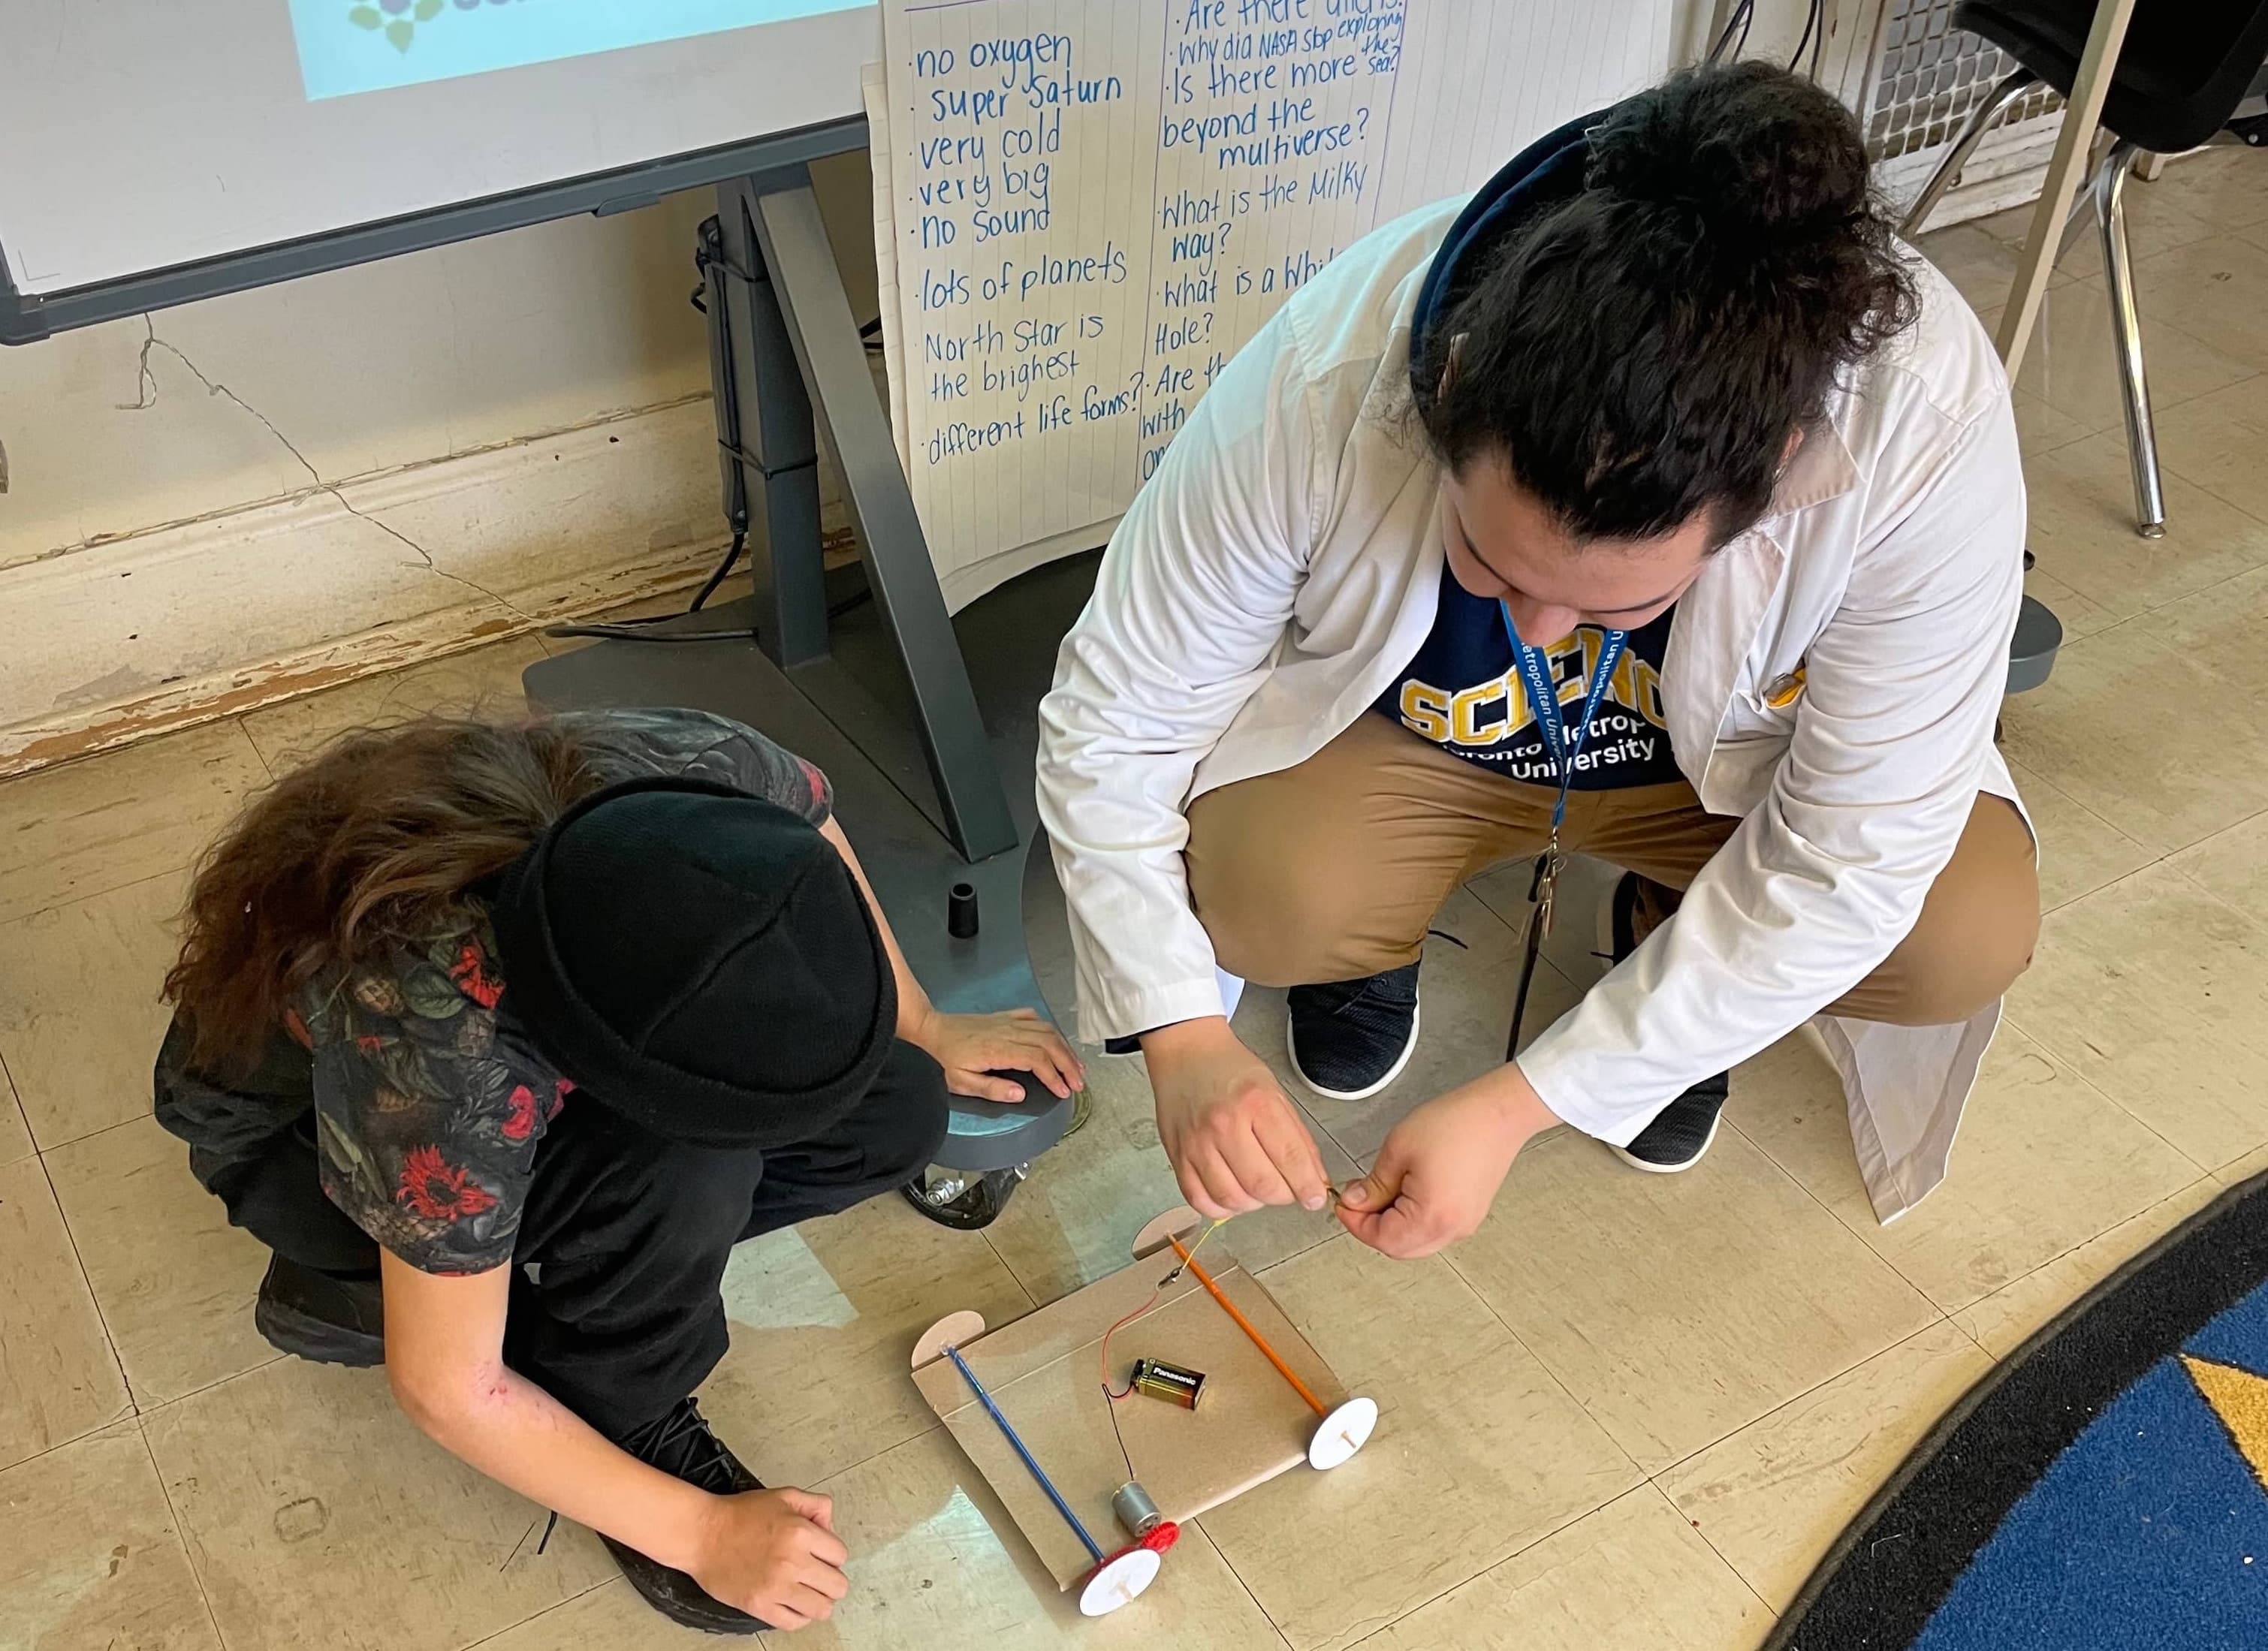 Caleb Wesley kneeling down working with a student on fixing their DC motor car during an in class workshop.